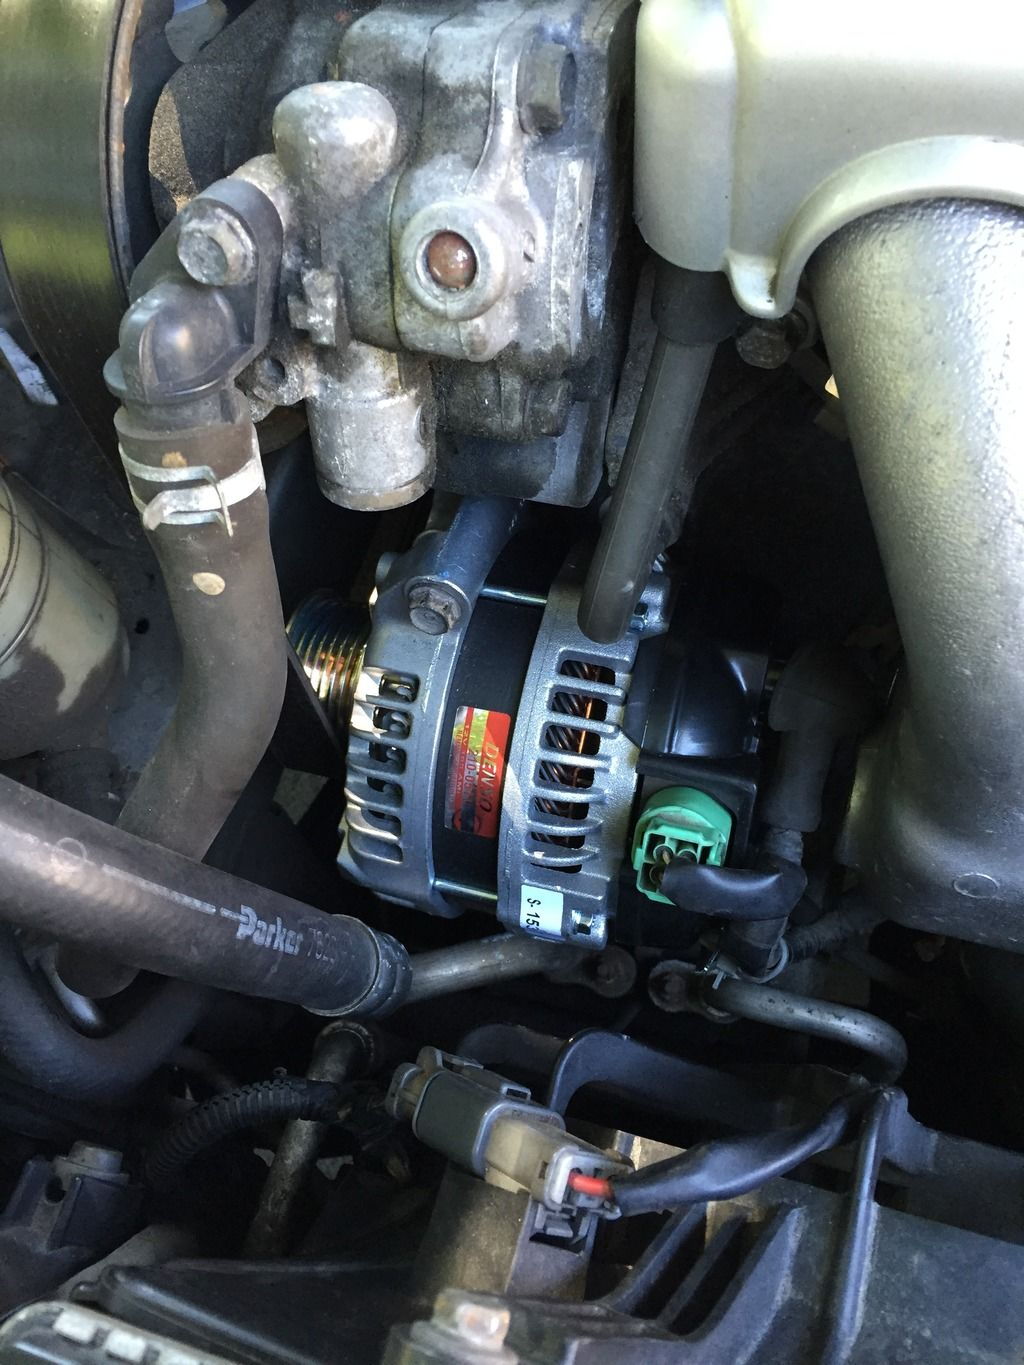 ACURA TSX WILL NOT WOT START BATTERY ALTERNATOR CHARGING ISSUE PROBLEM ELECTRICAL DRAIN FUSE JUMP START